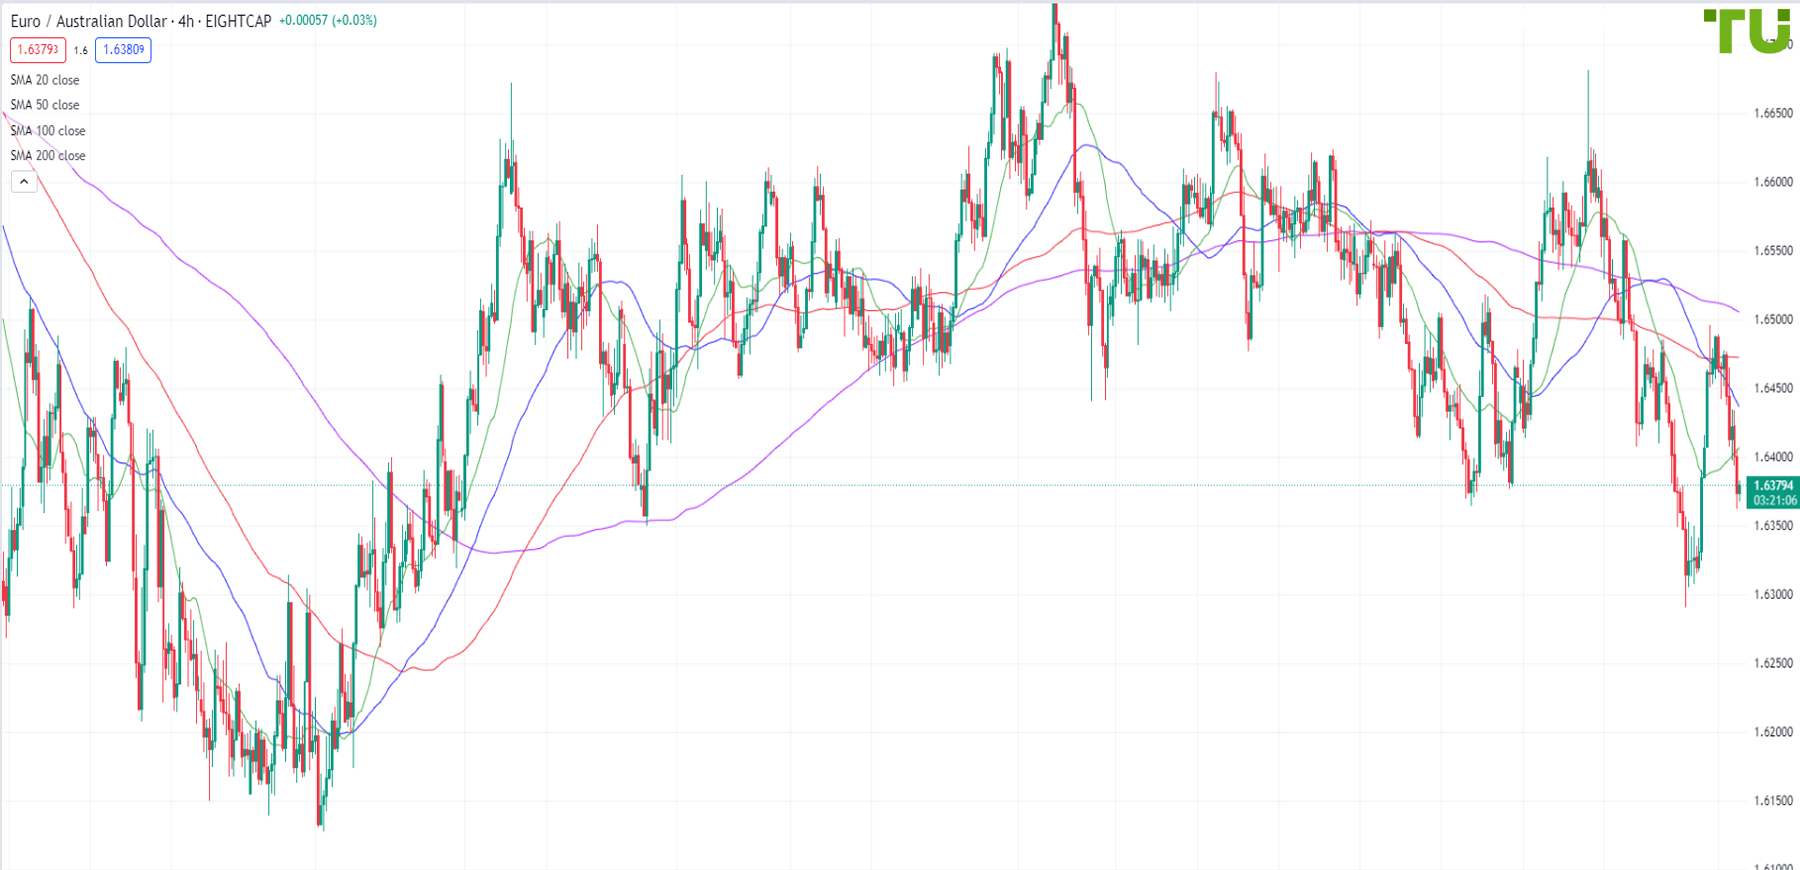 EUR/AUD continued to decline